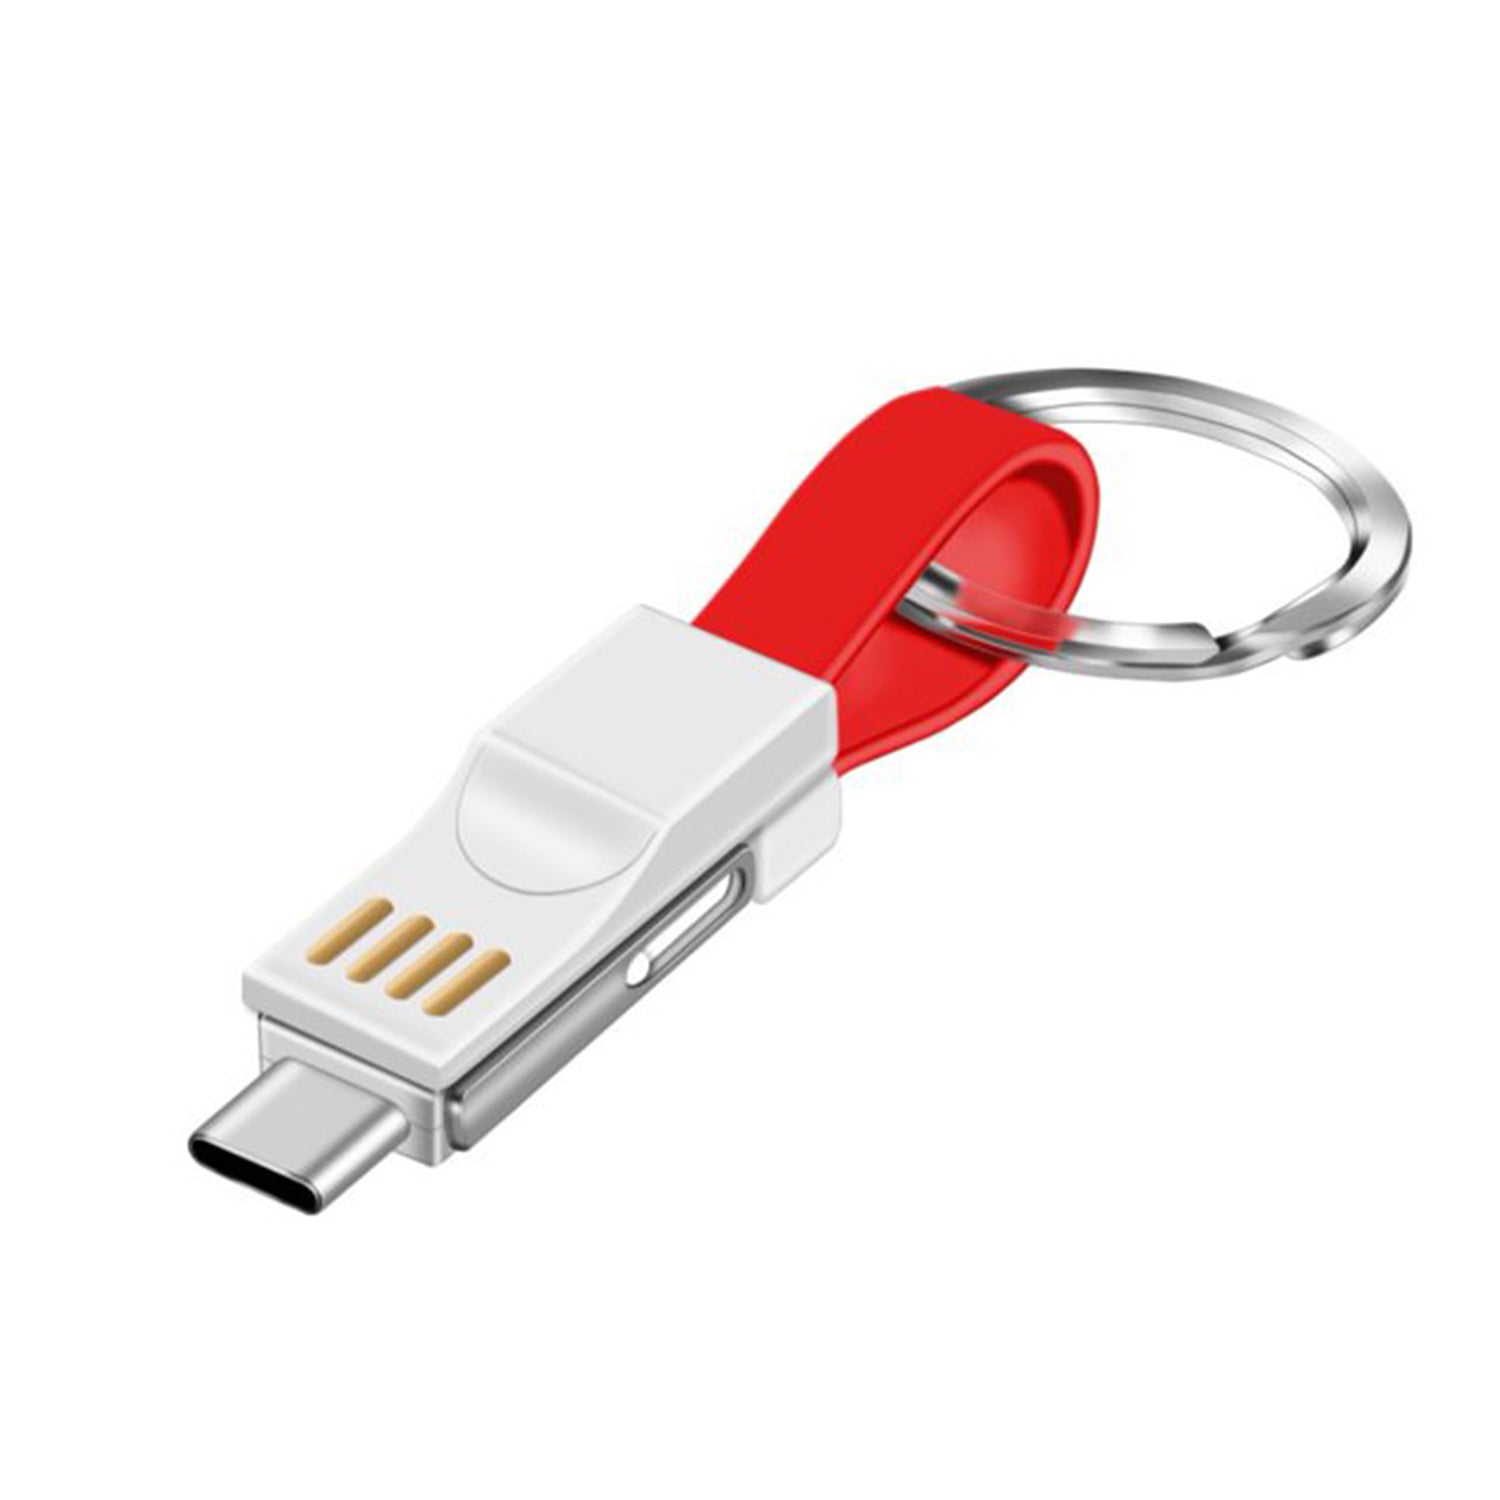 3 in 1 Key Chain USB Charge Cable Micro USB Type C Lighting Charger Cable For iPhone/Samsung/Android